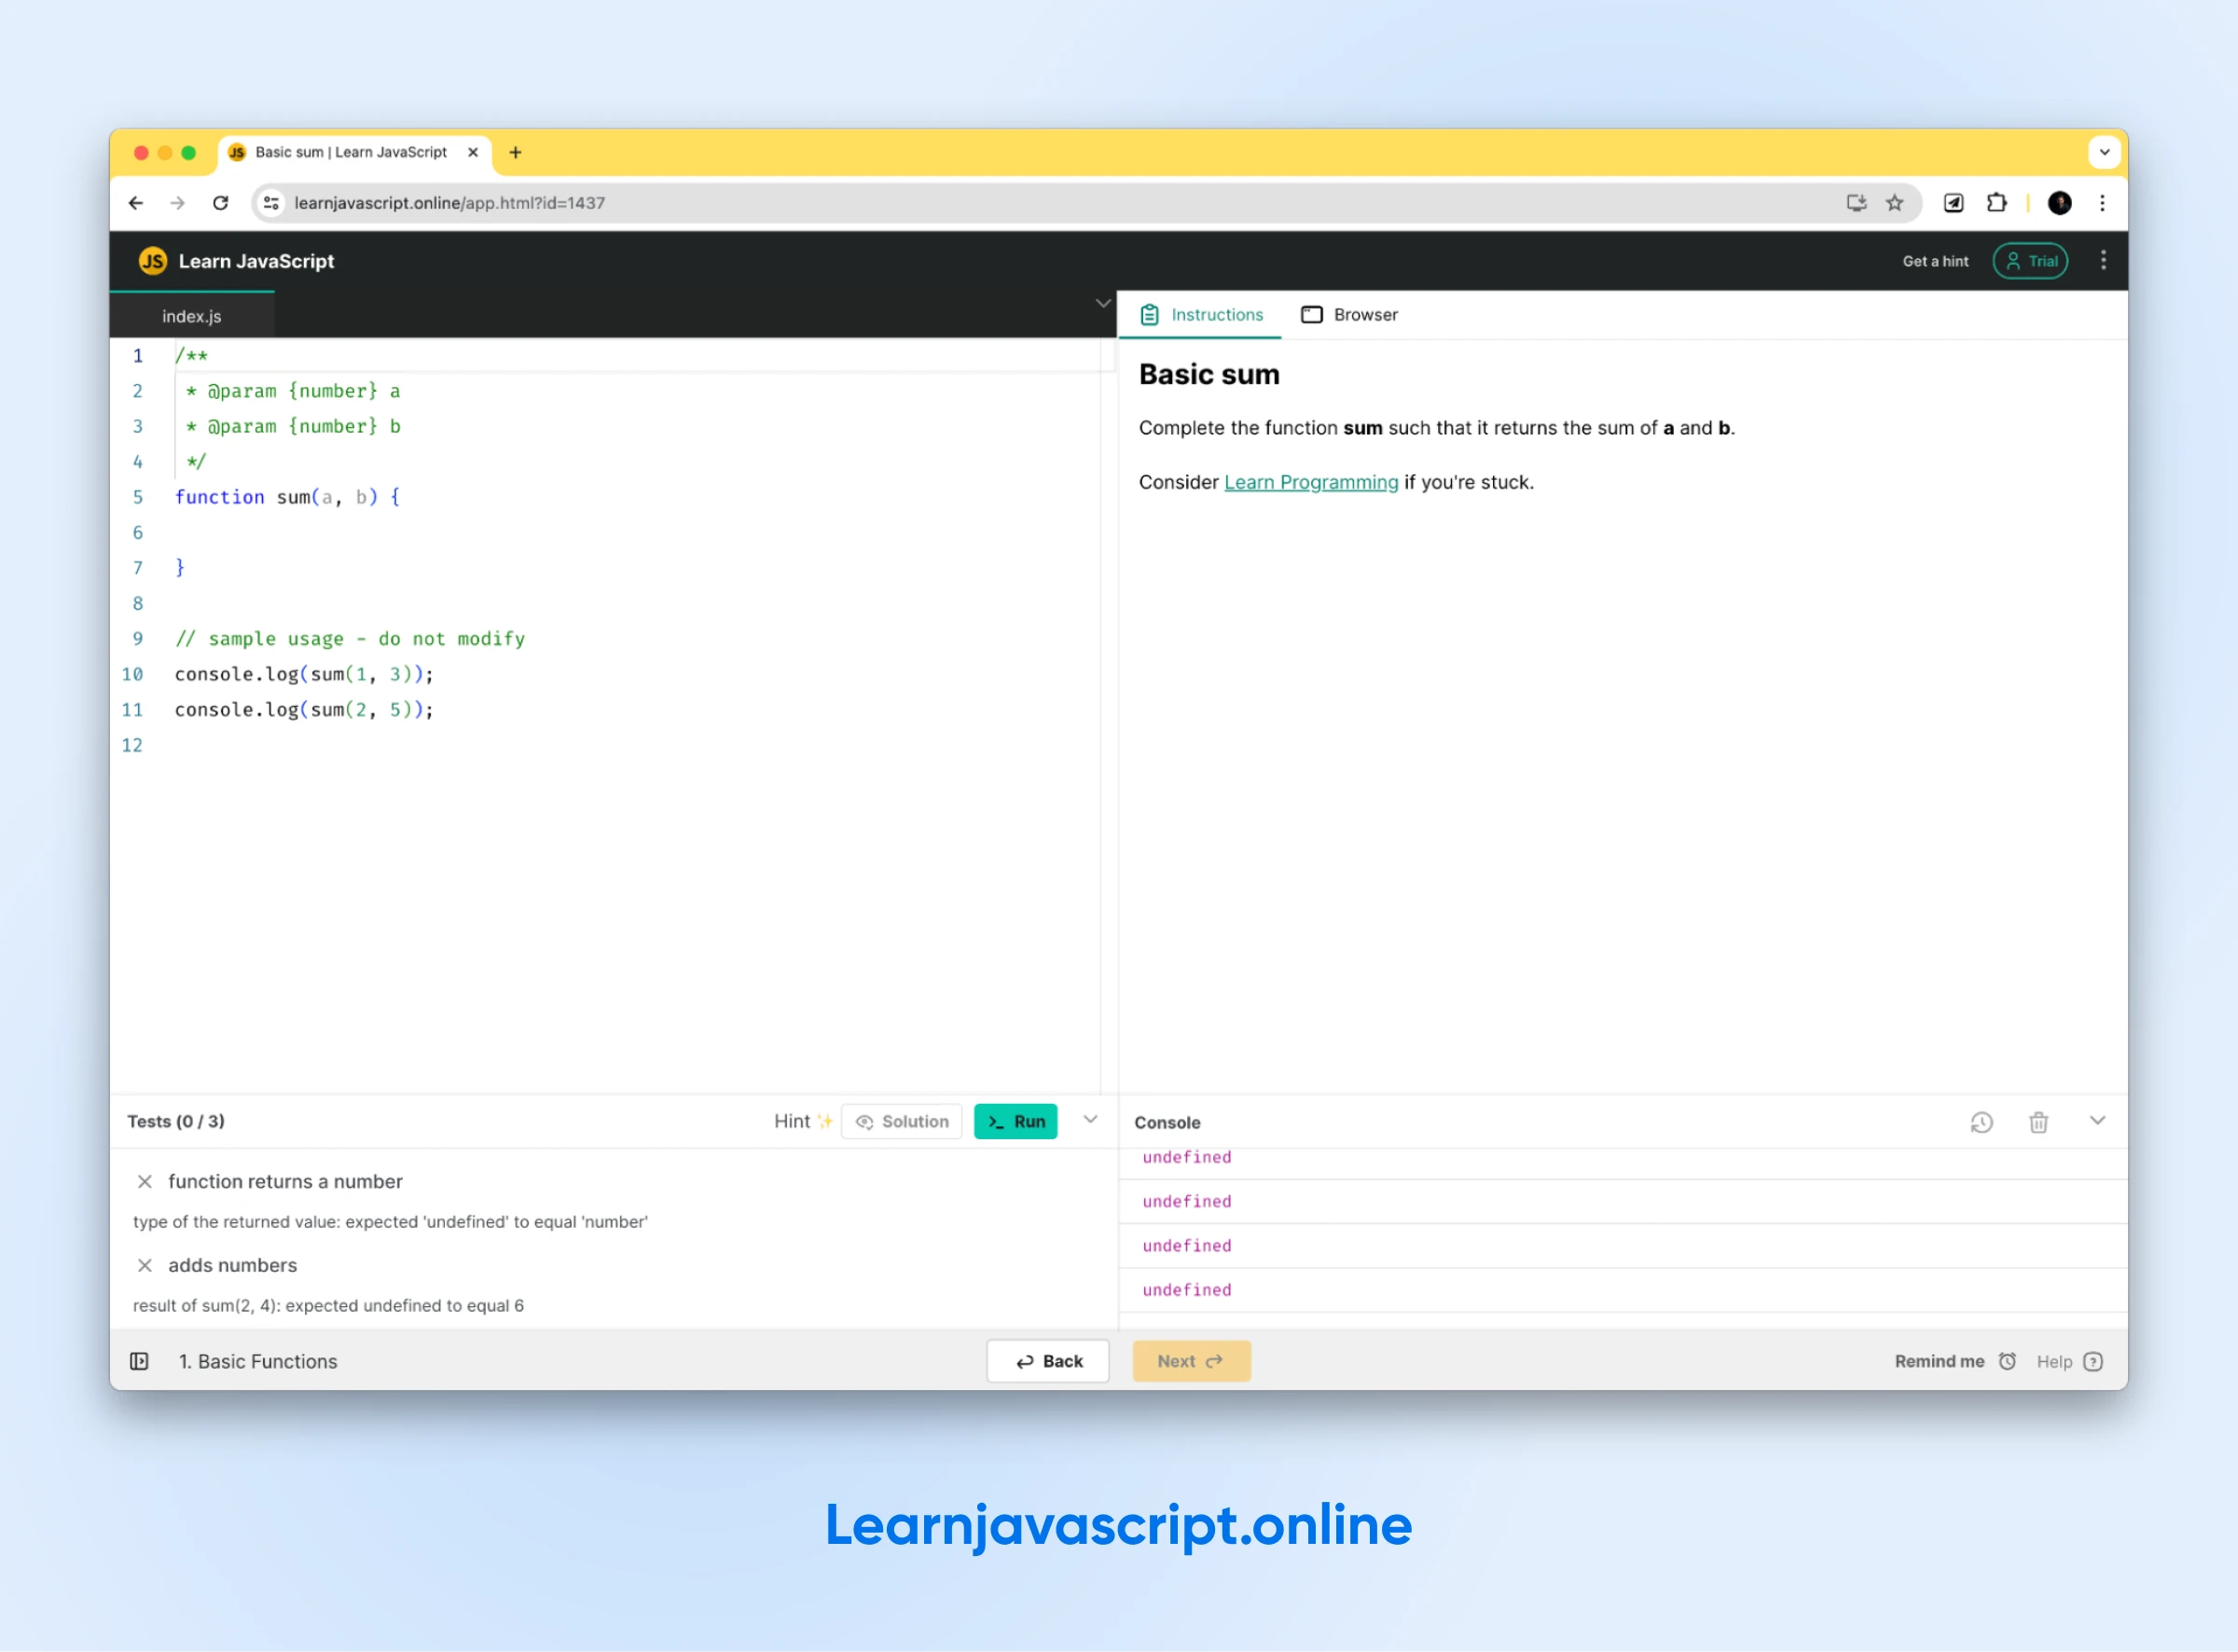 Learnjavascript.online's workspace opened to "Basic sum" with code on the right and instructions to start on the left.